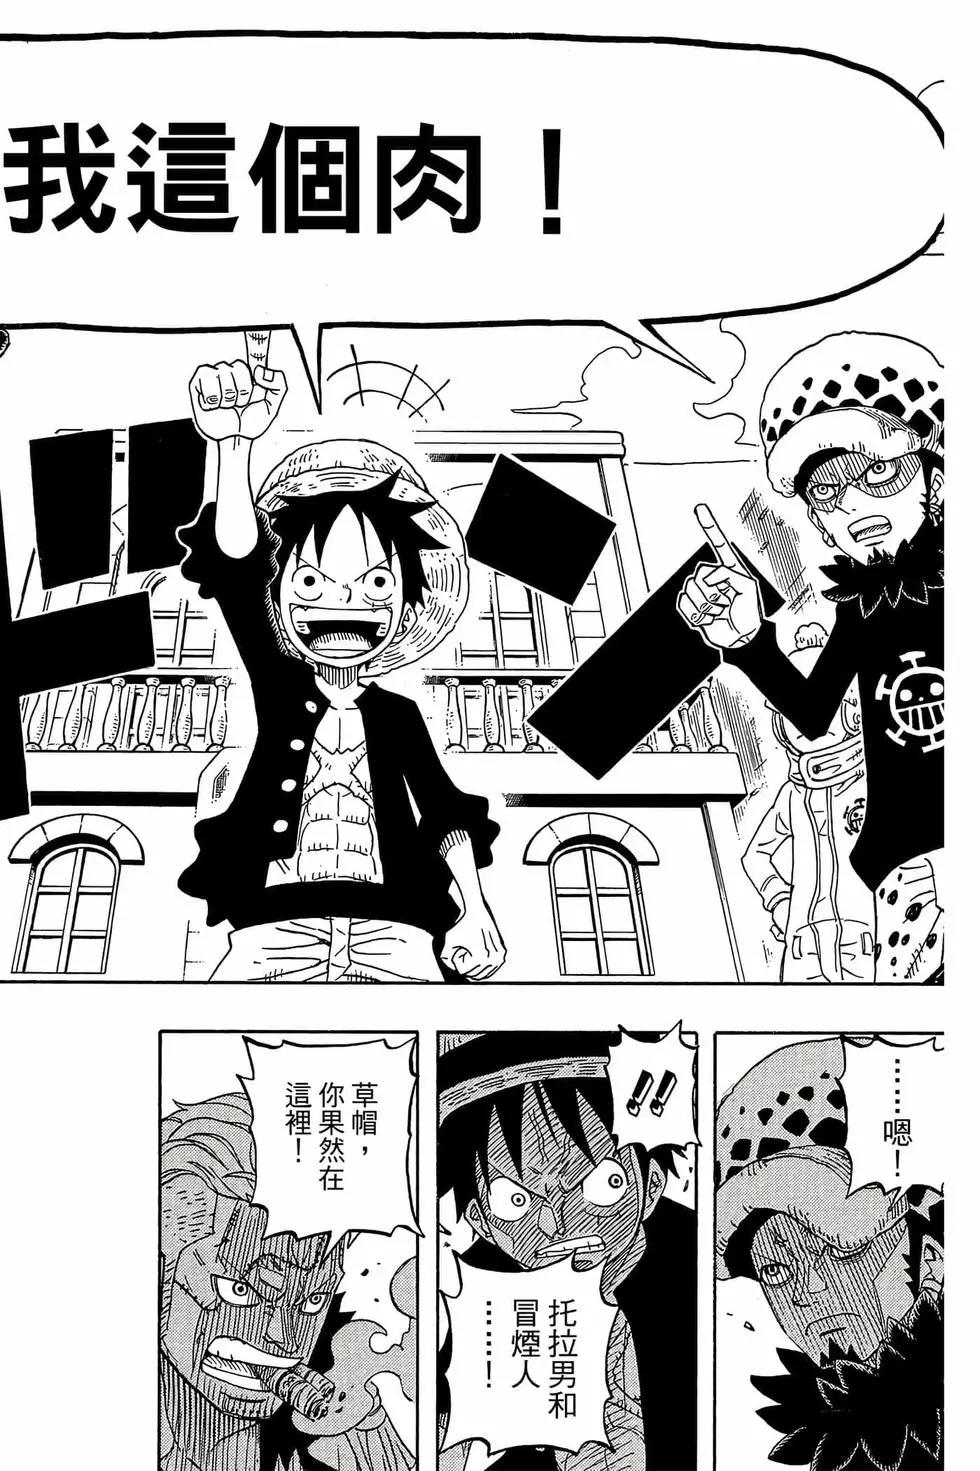 One piece party - 第01卷(1/4) - 7